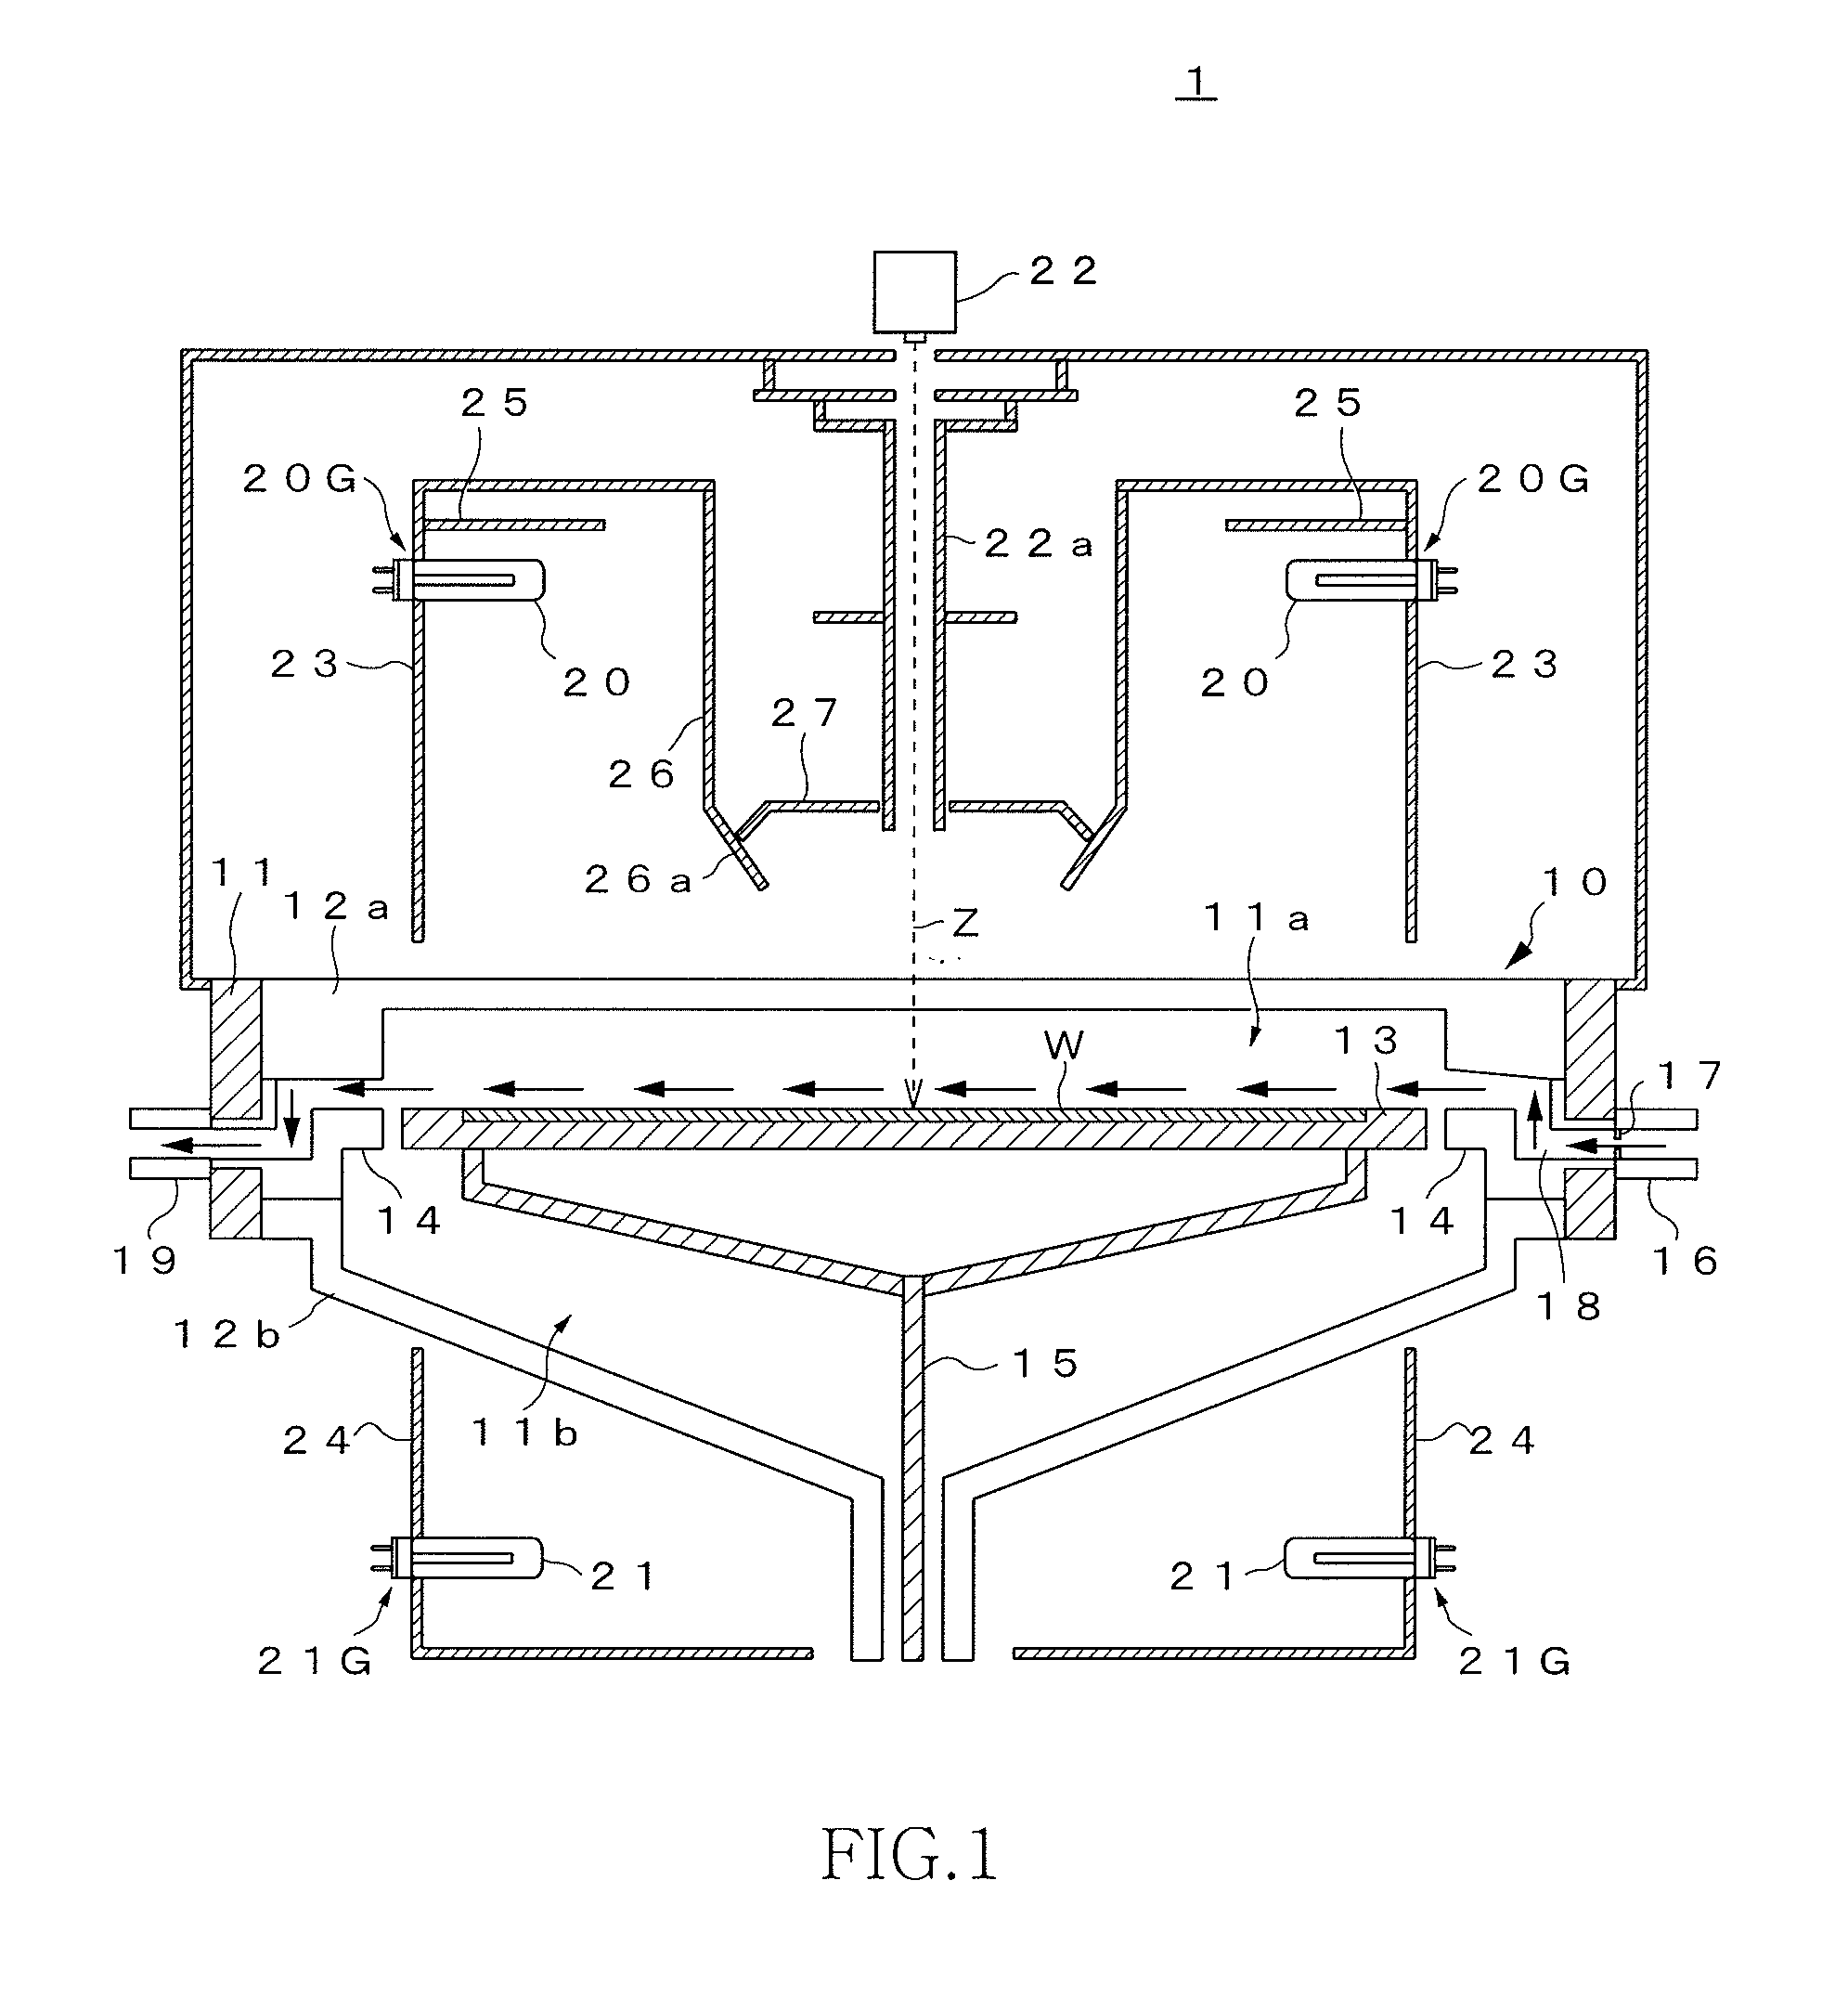 Epitaxial growth apparatus